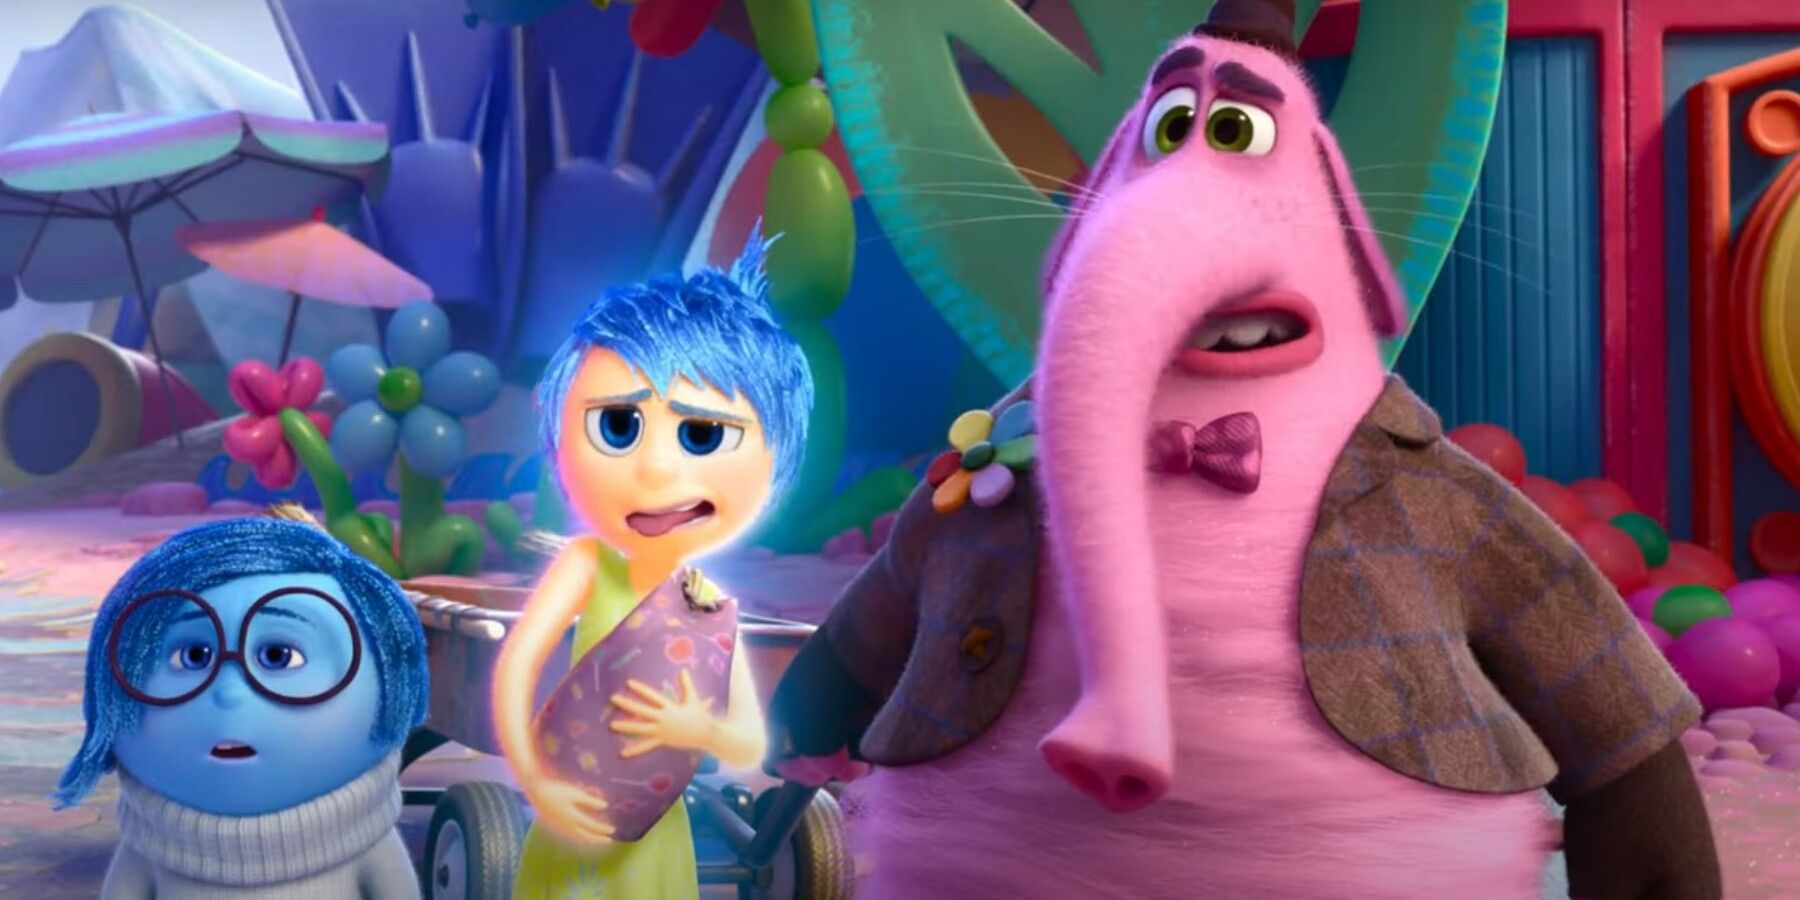 Joy Looking Disgusted While Sadness And Bing Bong Look Confused At Riley's Imaginary Boyfriend In Inside Out.jpg